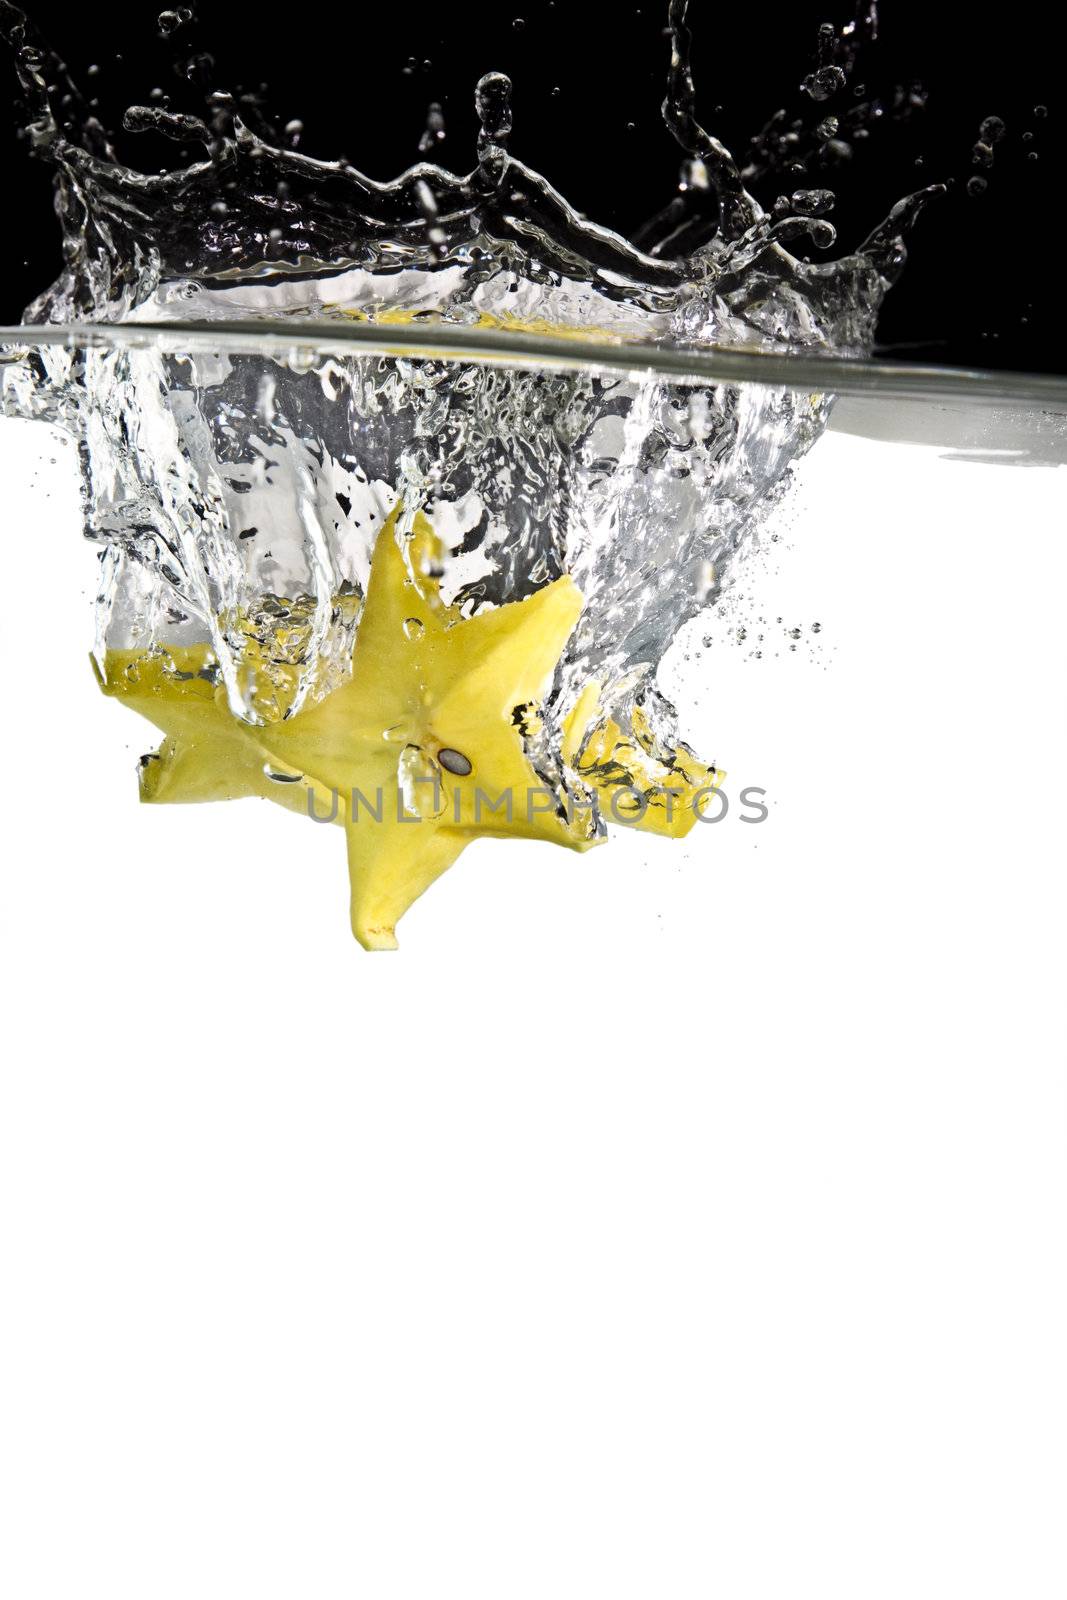 some yellow carambolas thrown in water with black and white background